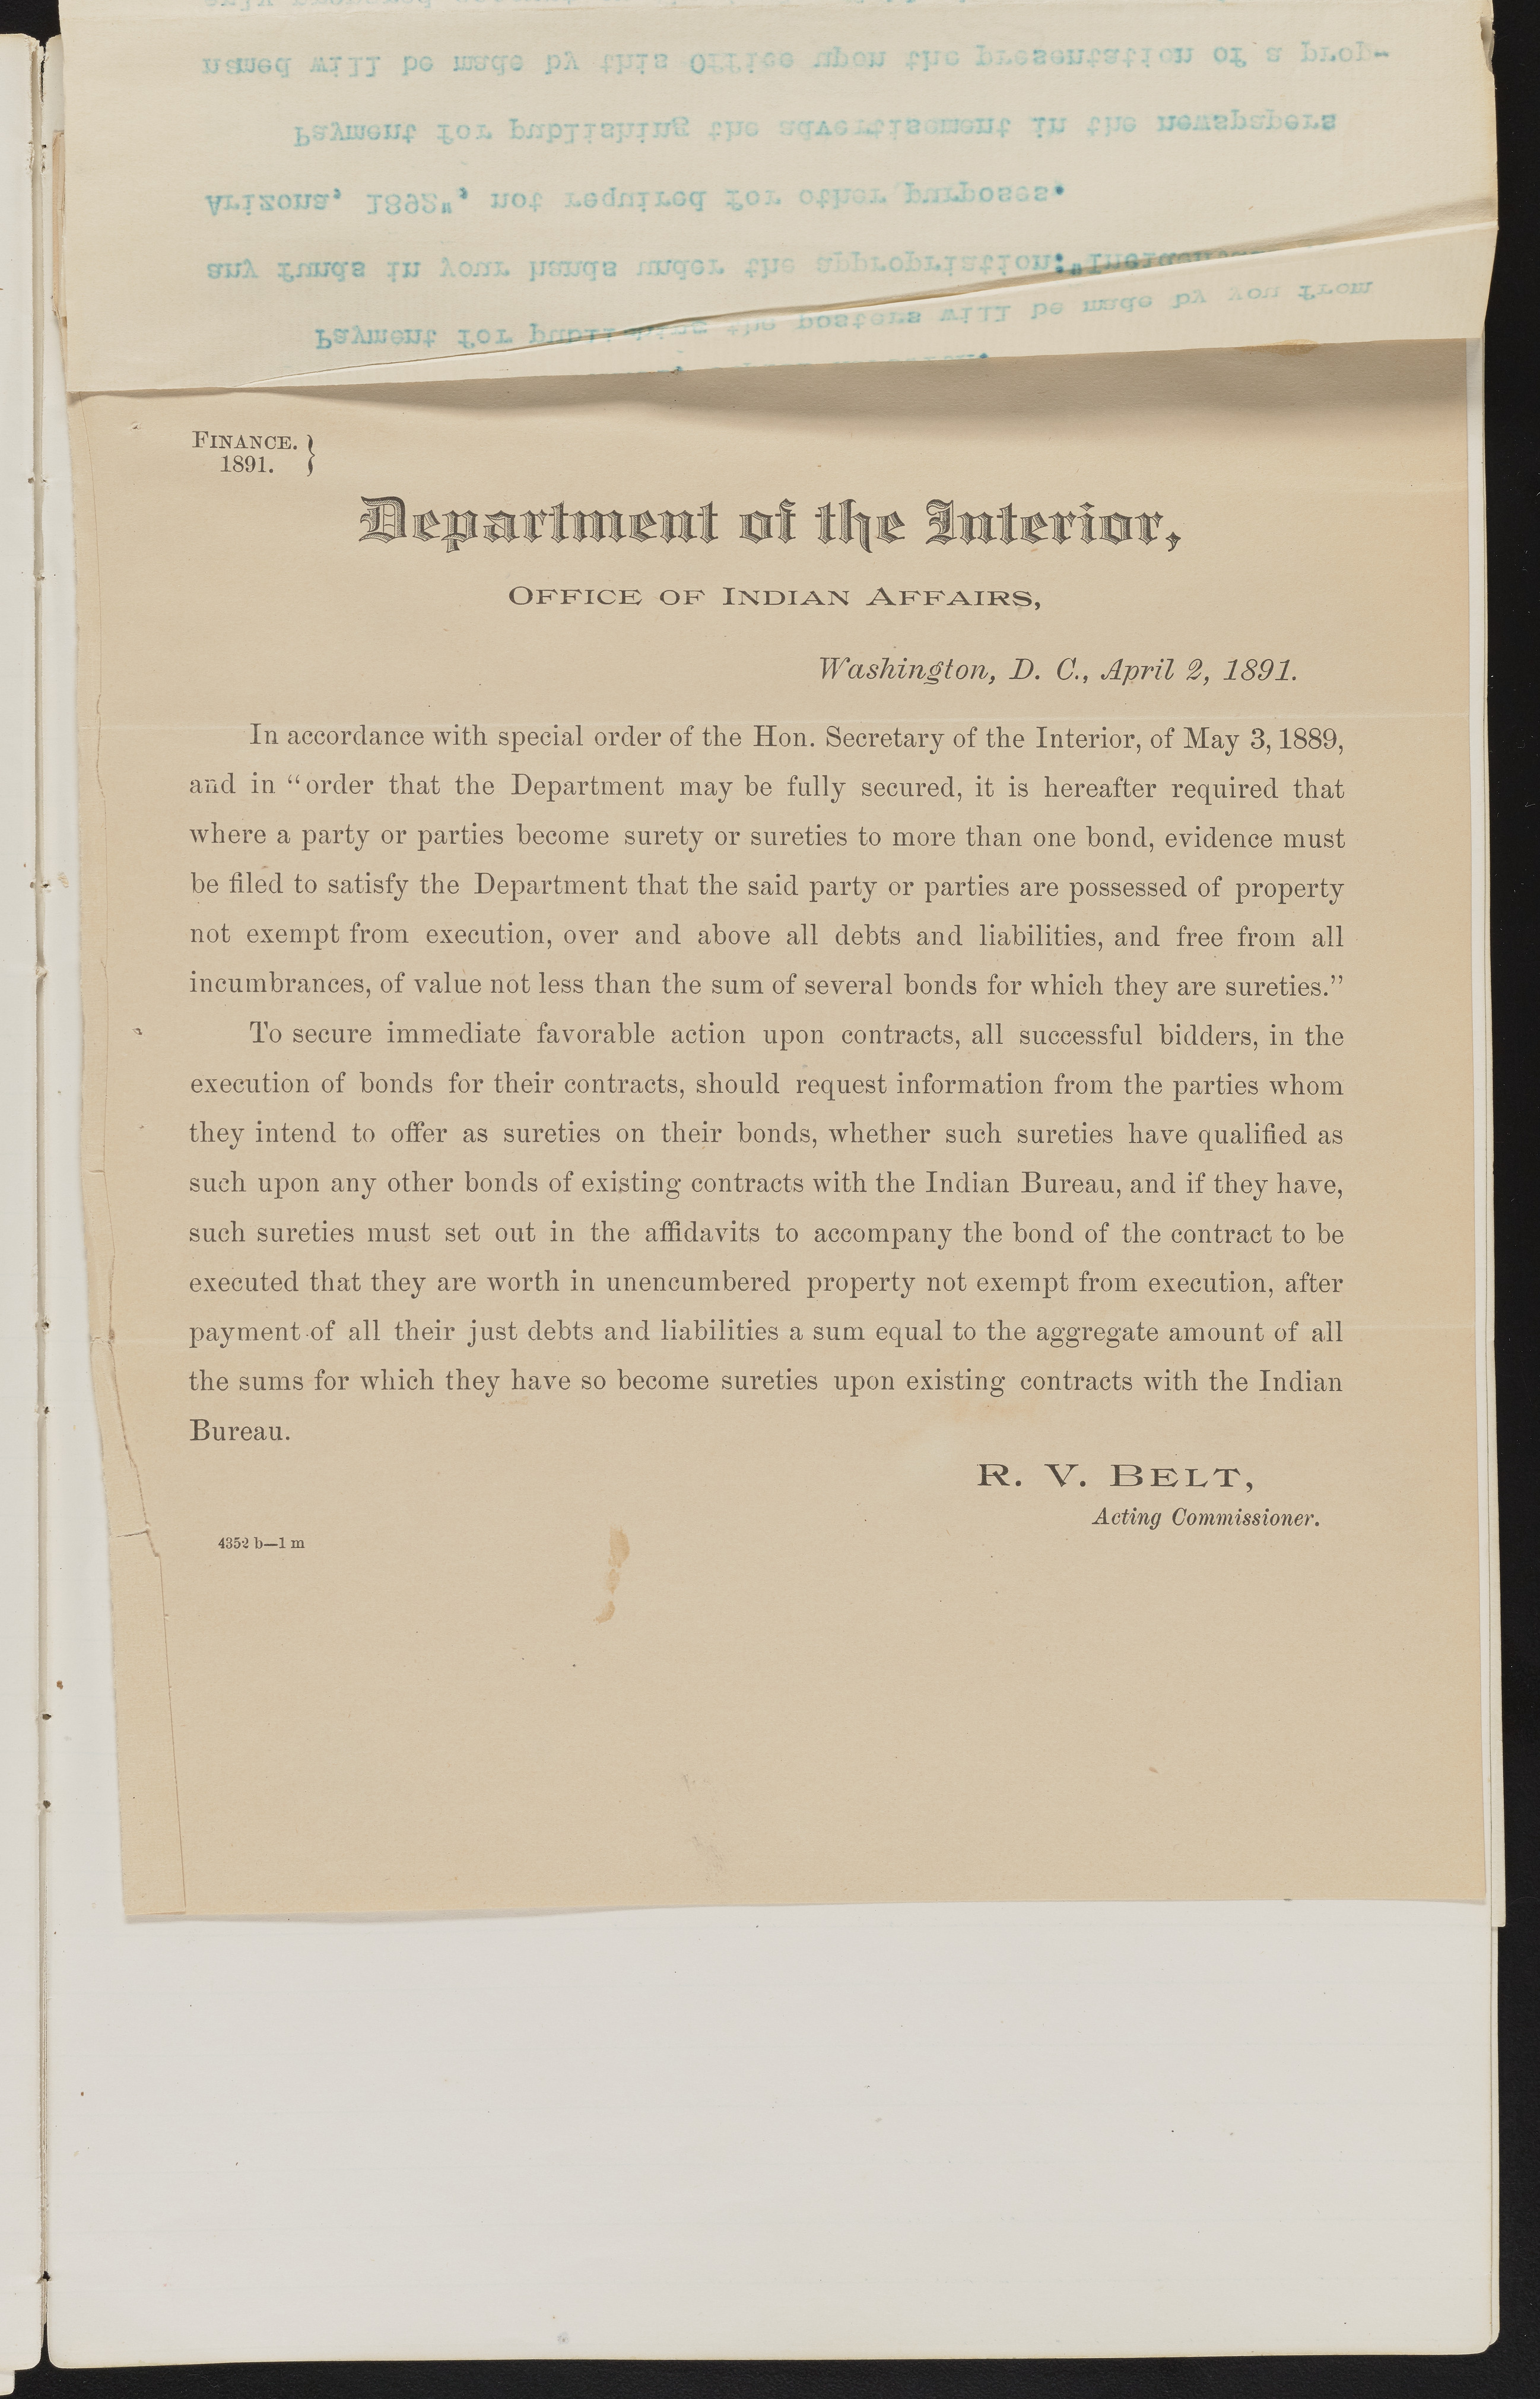 Fort Mojave Industrial School correspondence and a blueprint design of the Fort Mojave Pump Station, Washington (D.C.), 1891-1893, snv002595-14